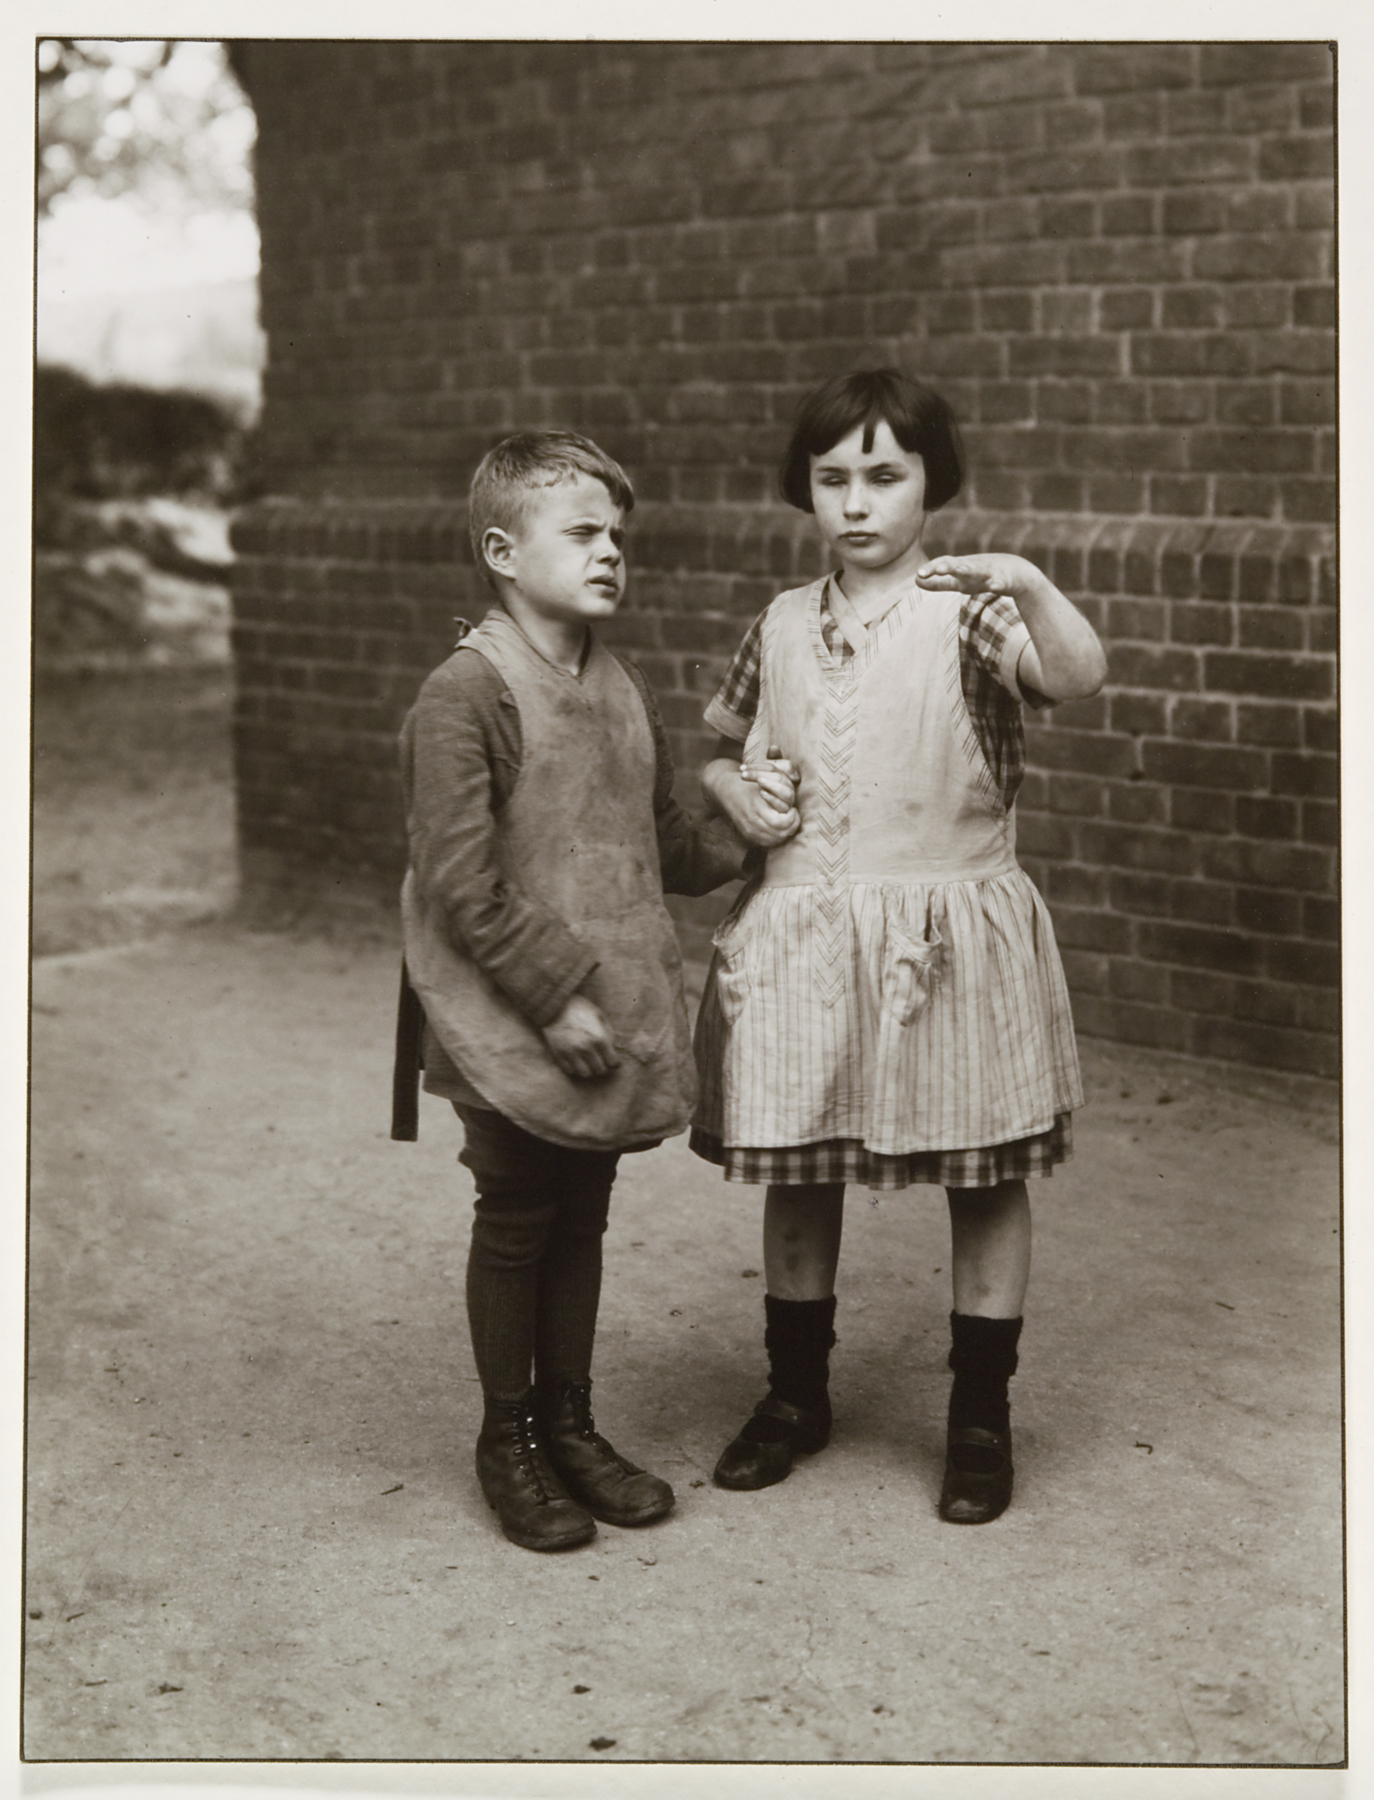 Two children (identified as blind) holding hands. The girl on the right has her proper left arm raised. There is a brick wall behind the two children.